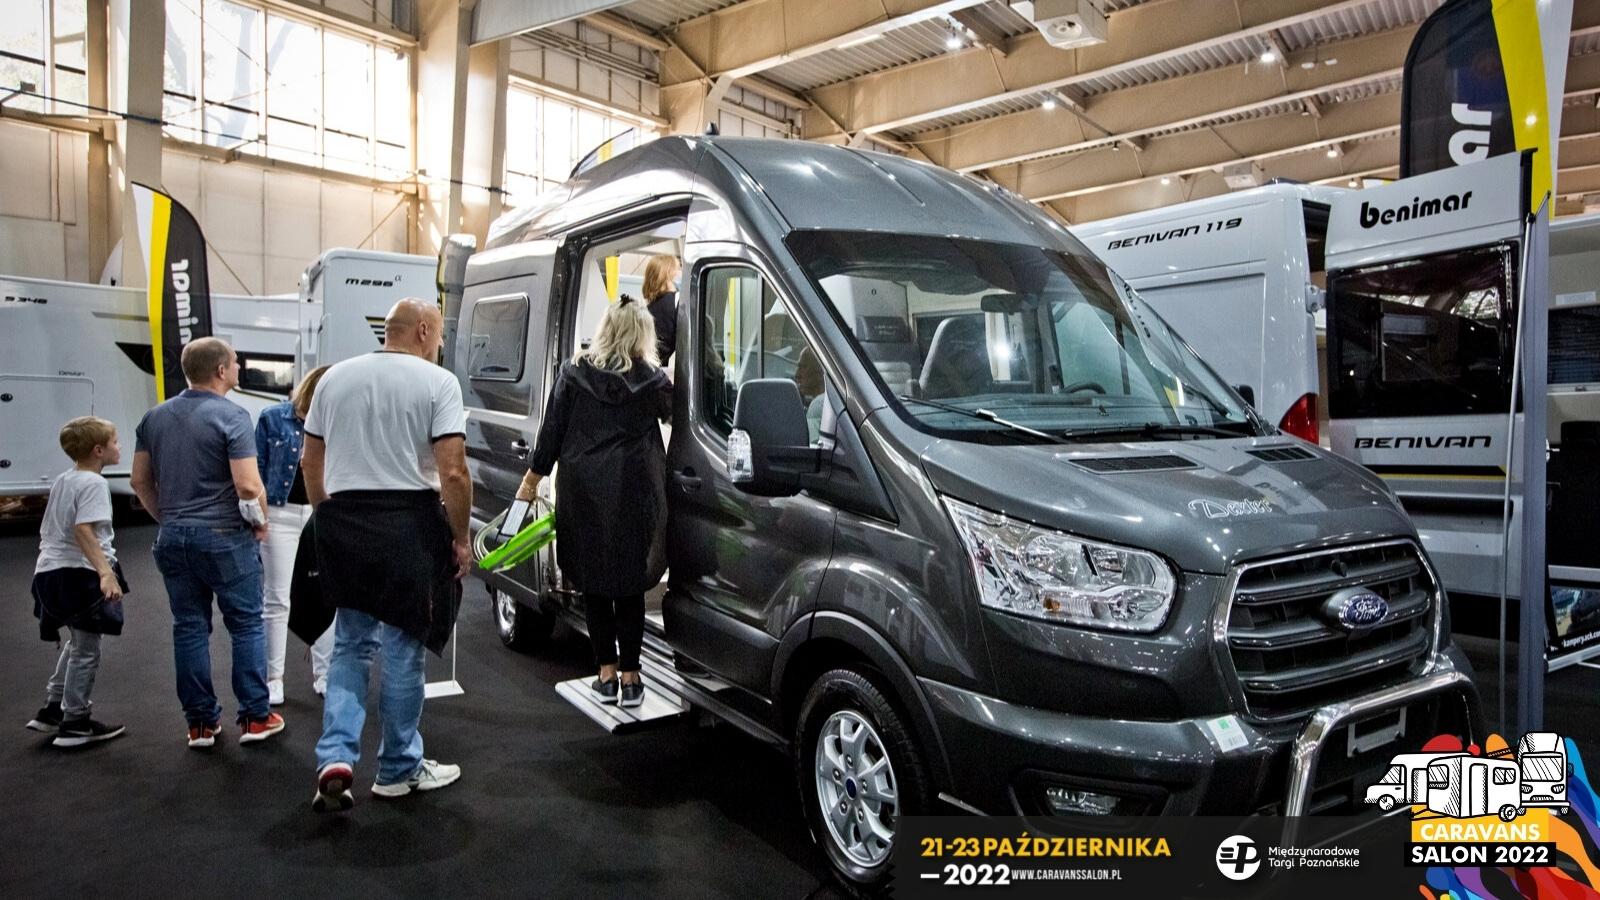 This is for sure! The 5th edition of Caravans Salon Poland in Poznań from 21 to 23 October 2022 – image 3